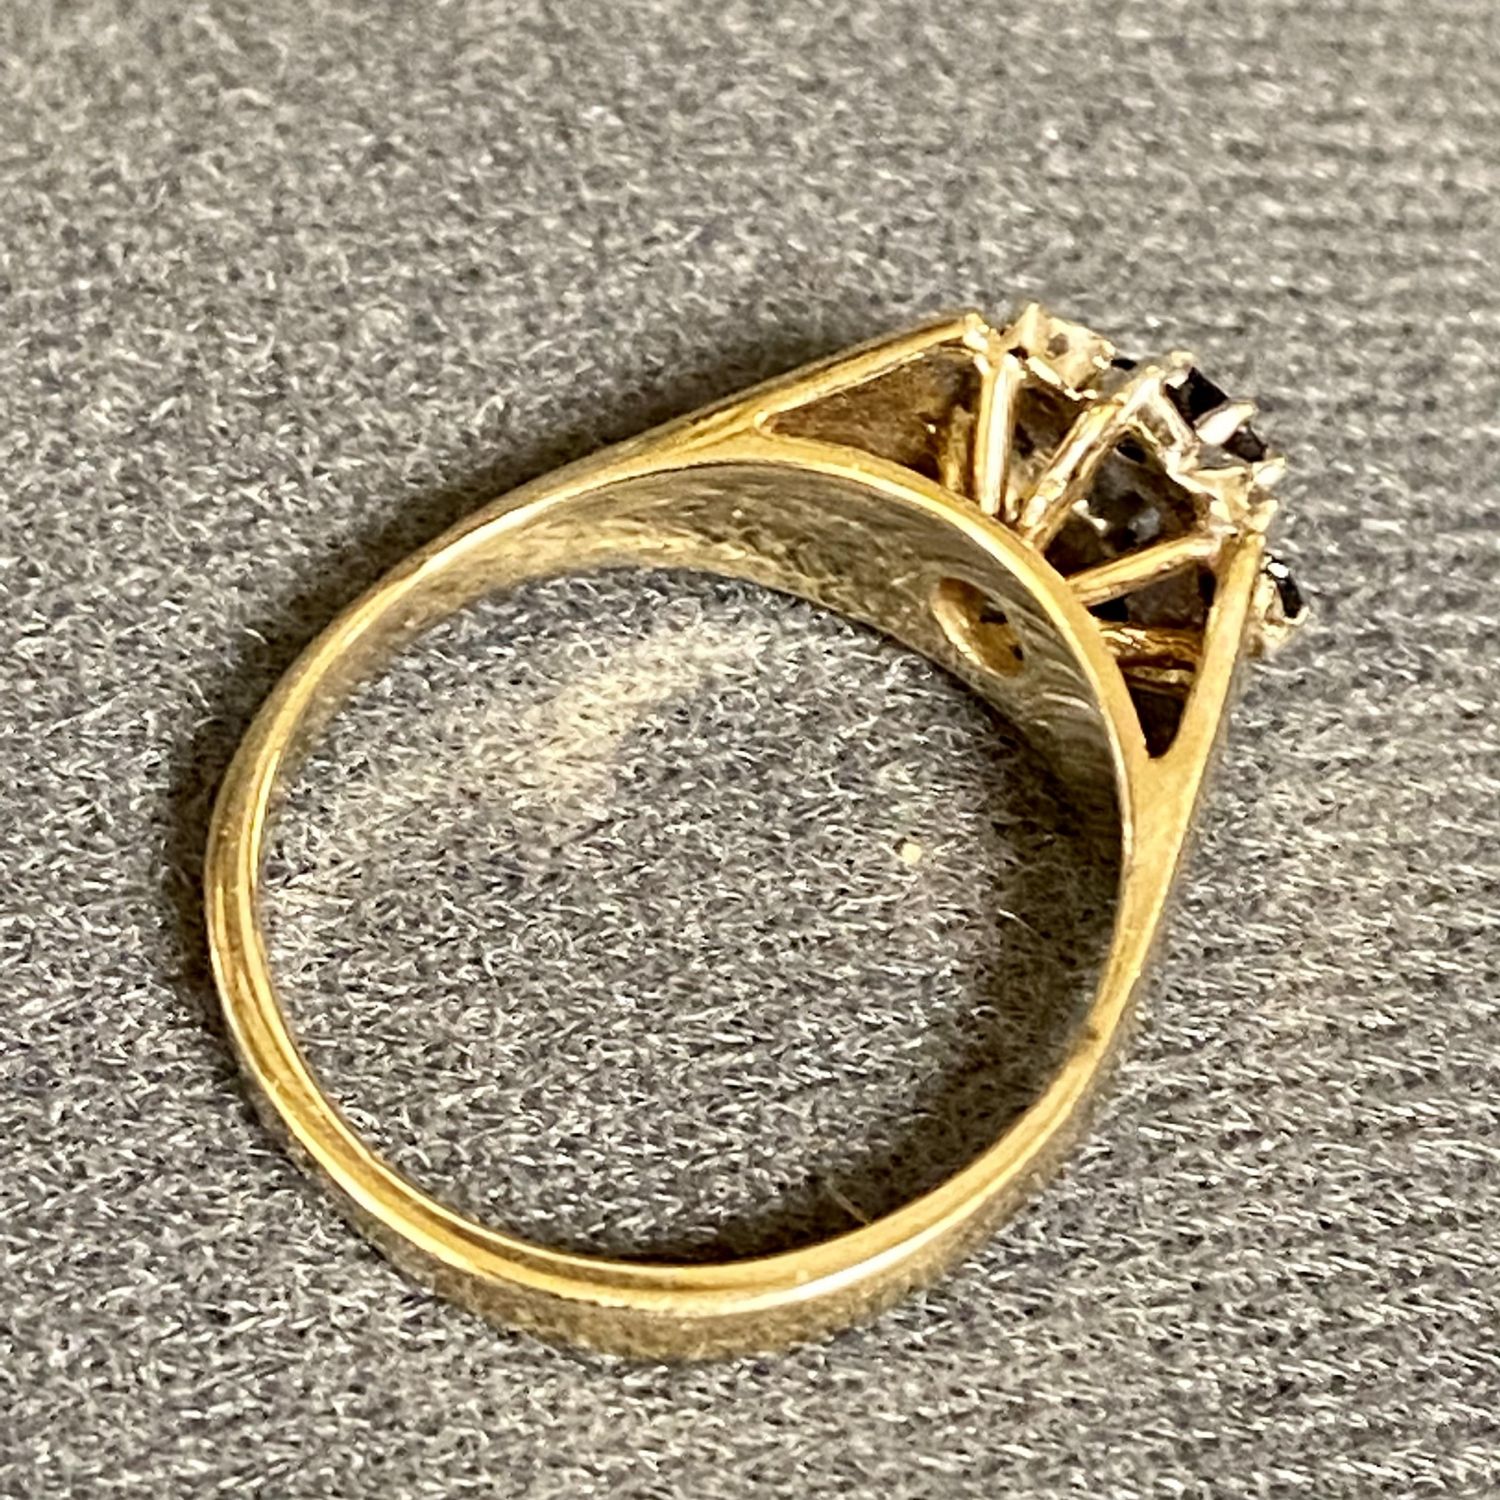 Heavy 9ct Gold Diamond and Sapphire Ring - Jewellery & Gold - Hemswell ...